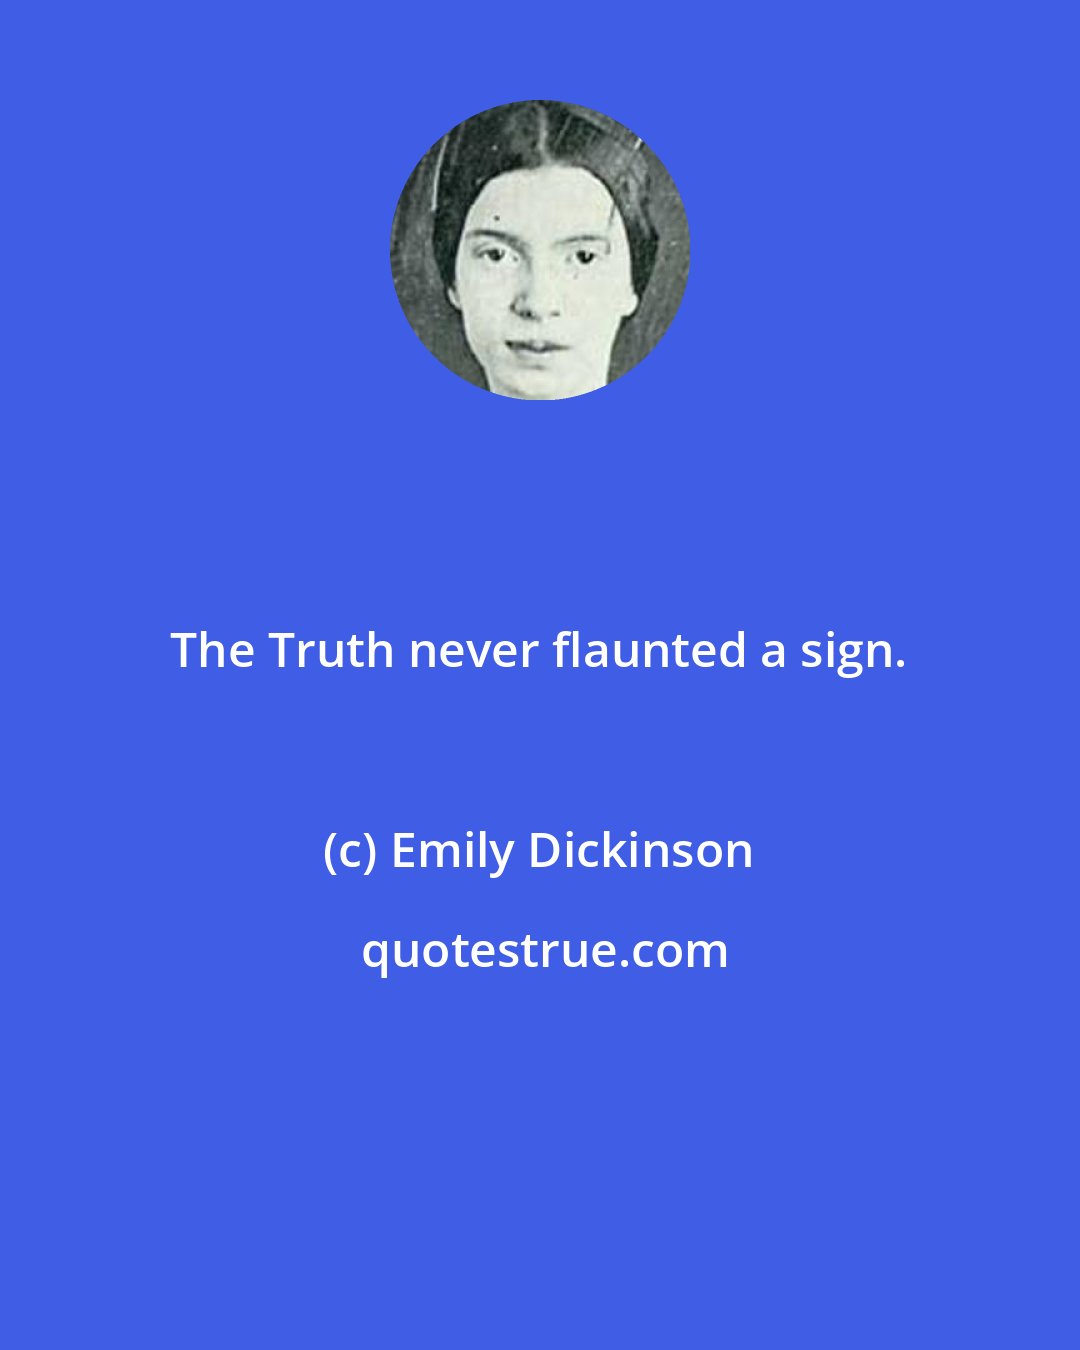 Emily Dickinson: The Truth never flaunted a sign.